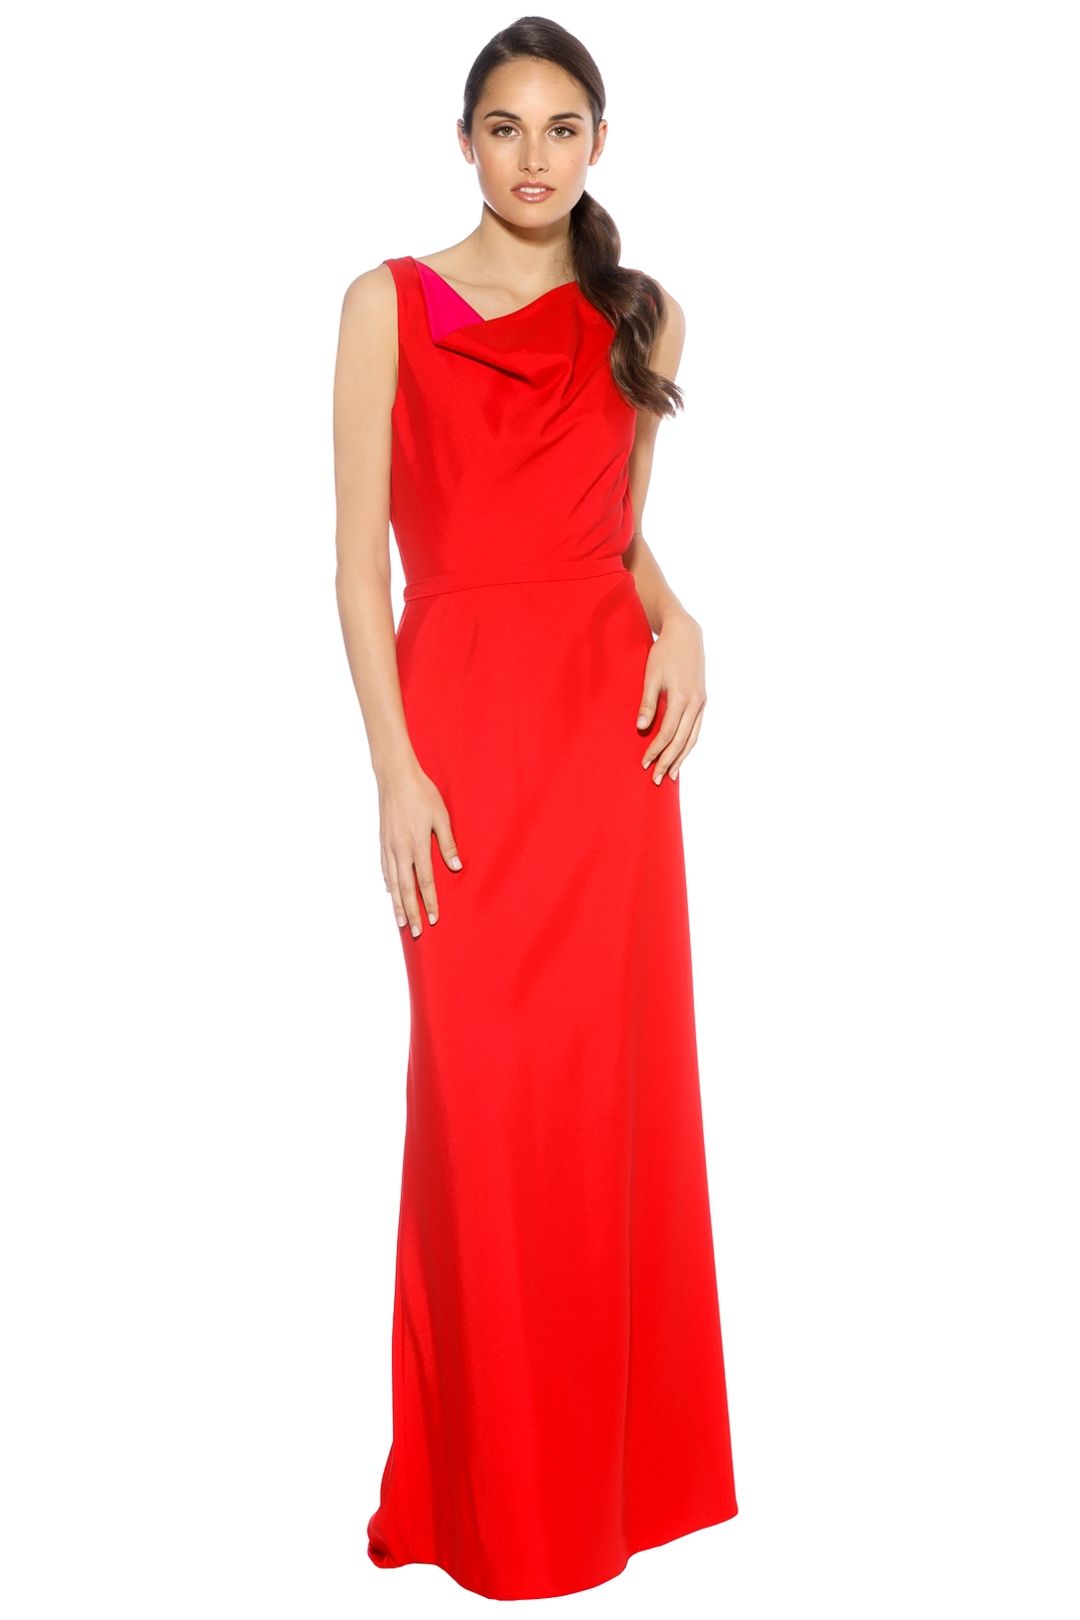 LUOM.O - Paloma Dress - Red - Front